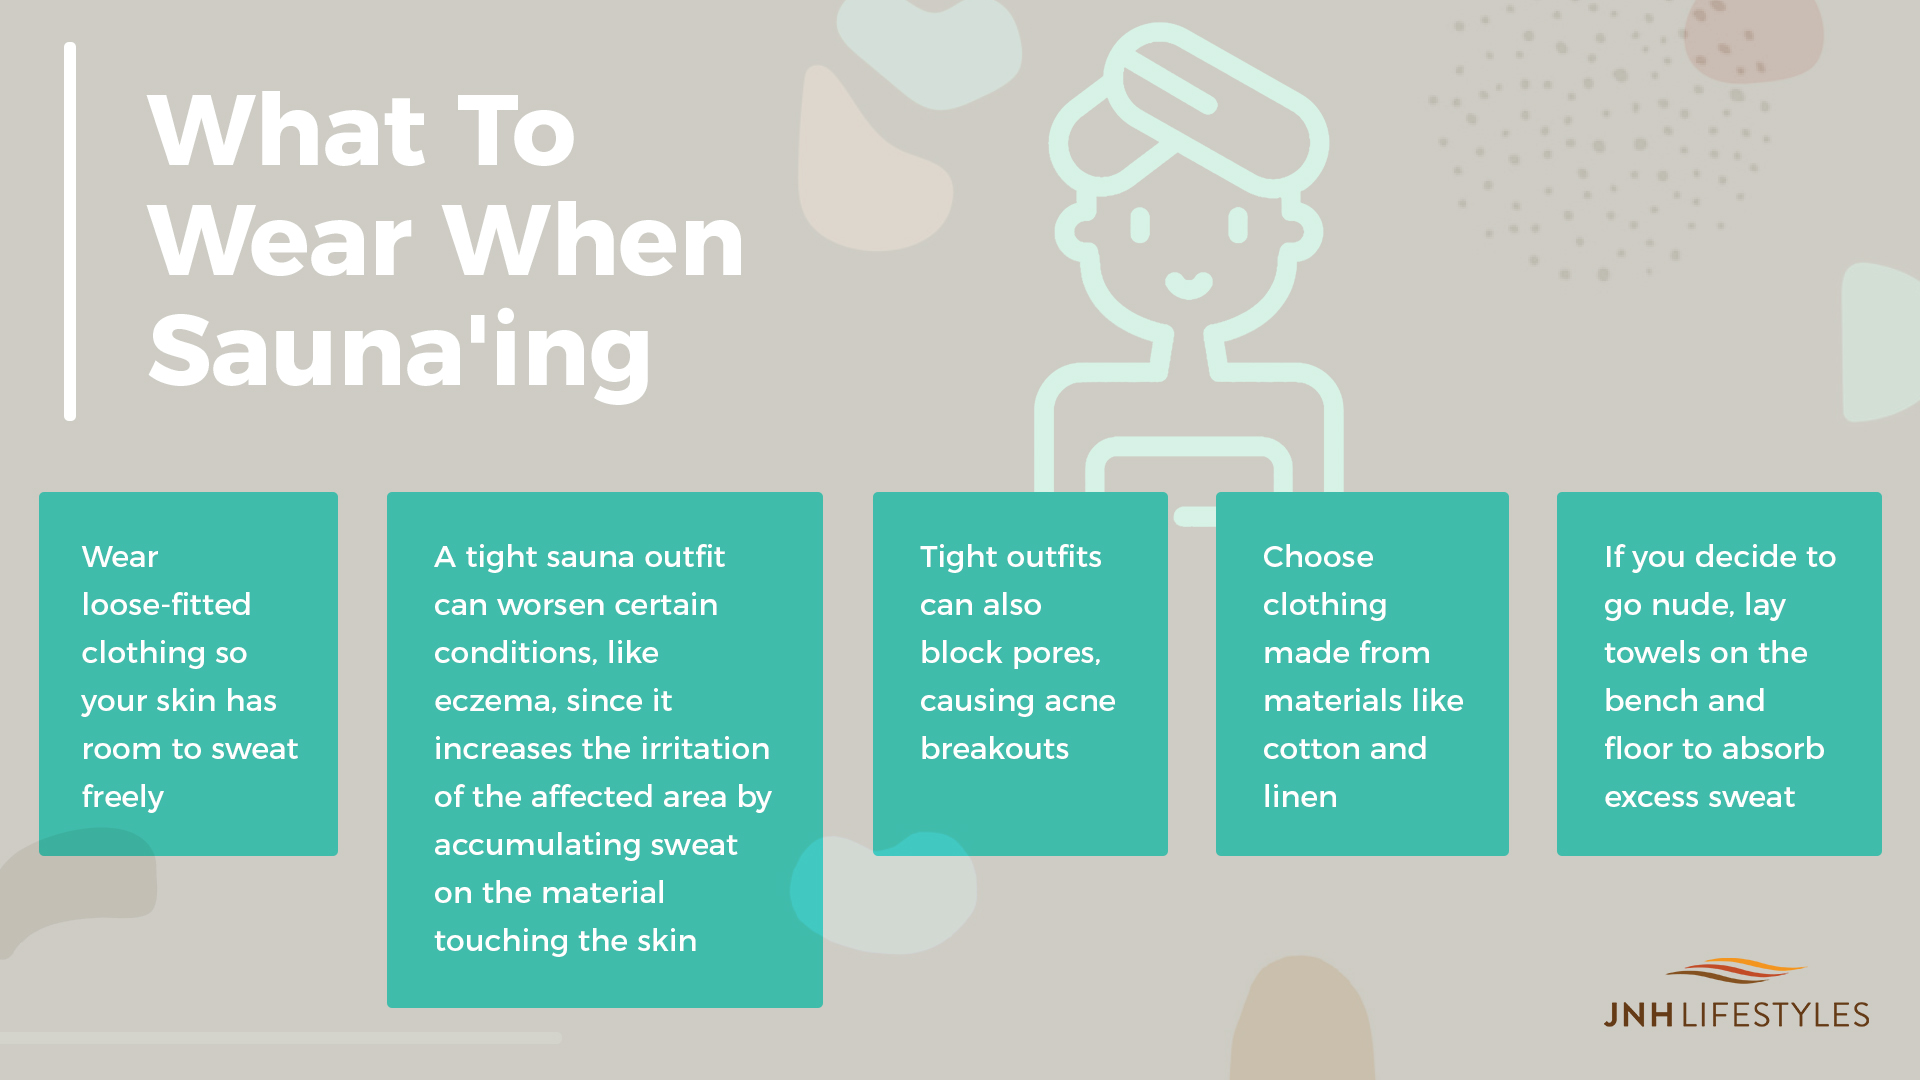 Do You Wear Clothes in Infrared Sauna?